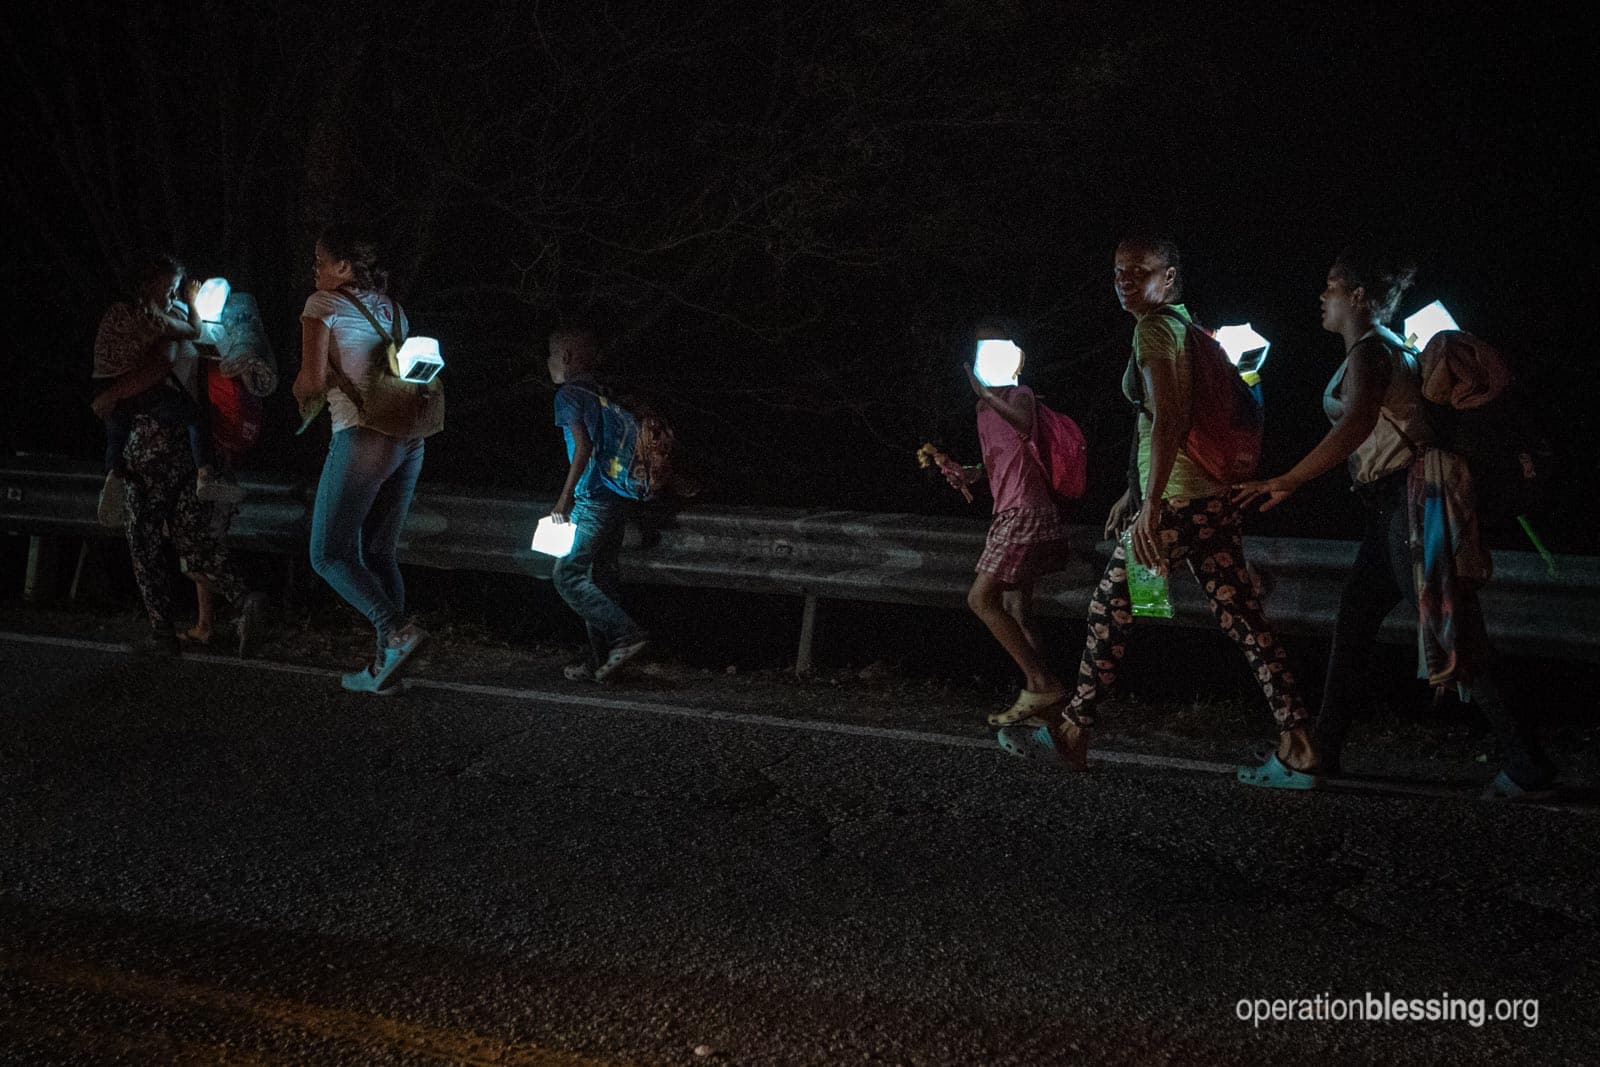 Venezuelan refugees walk on a highway in the dark with solar lamps from Operation Blessing.